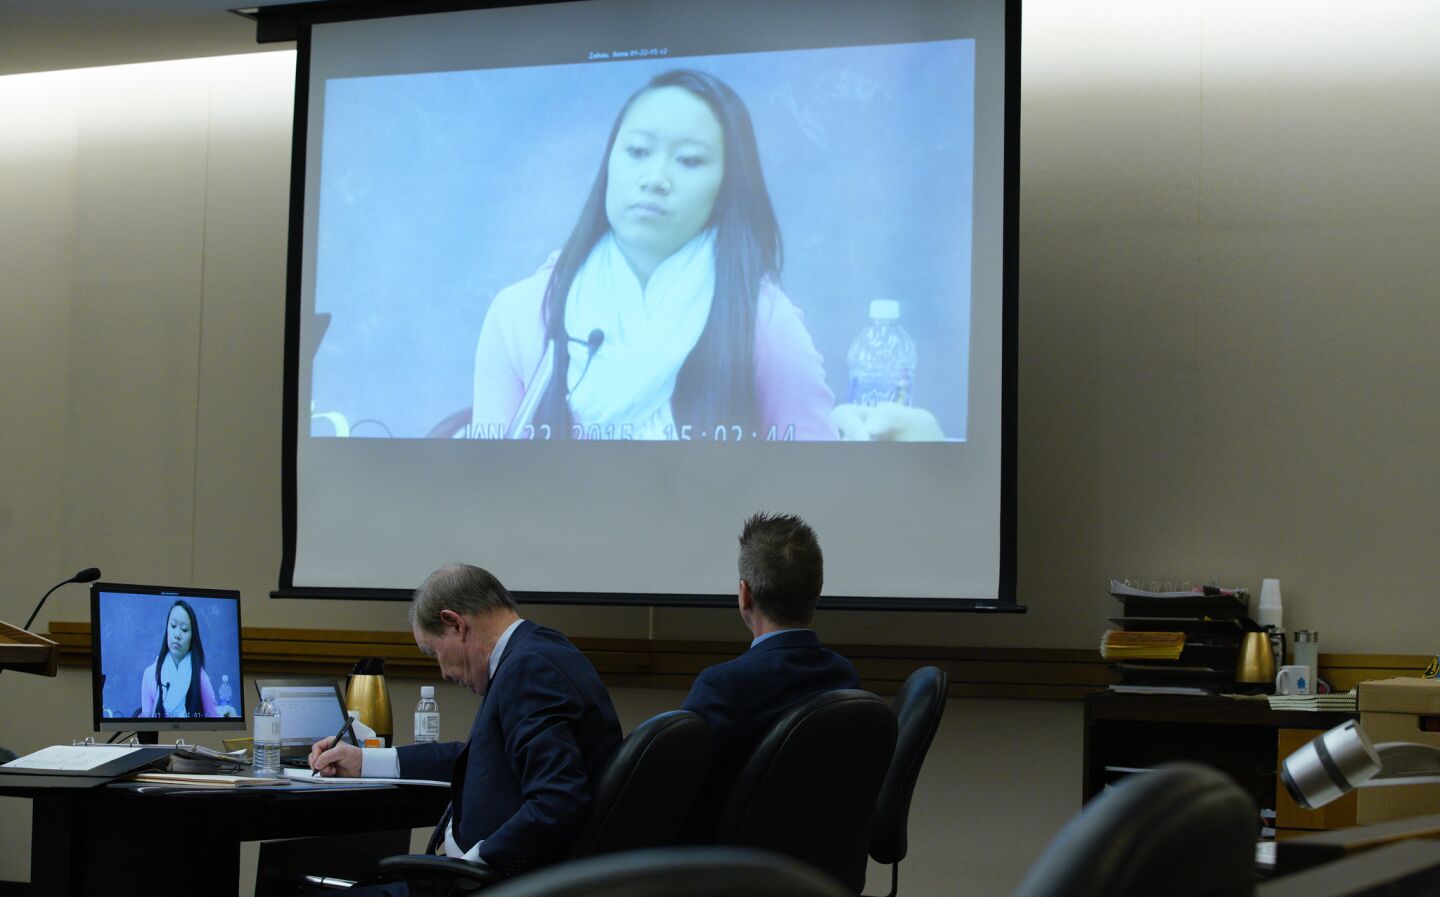 Adam Shacknai (right) sits next to his attorney, Dan Webb as a video is played of Rebecca Zahau's younger sister Xena Zahau taken during her January 22, 2015 deposition.